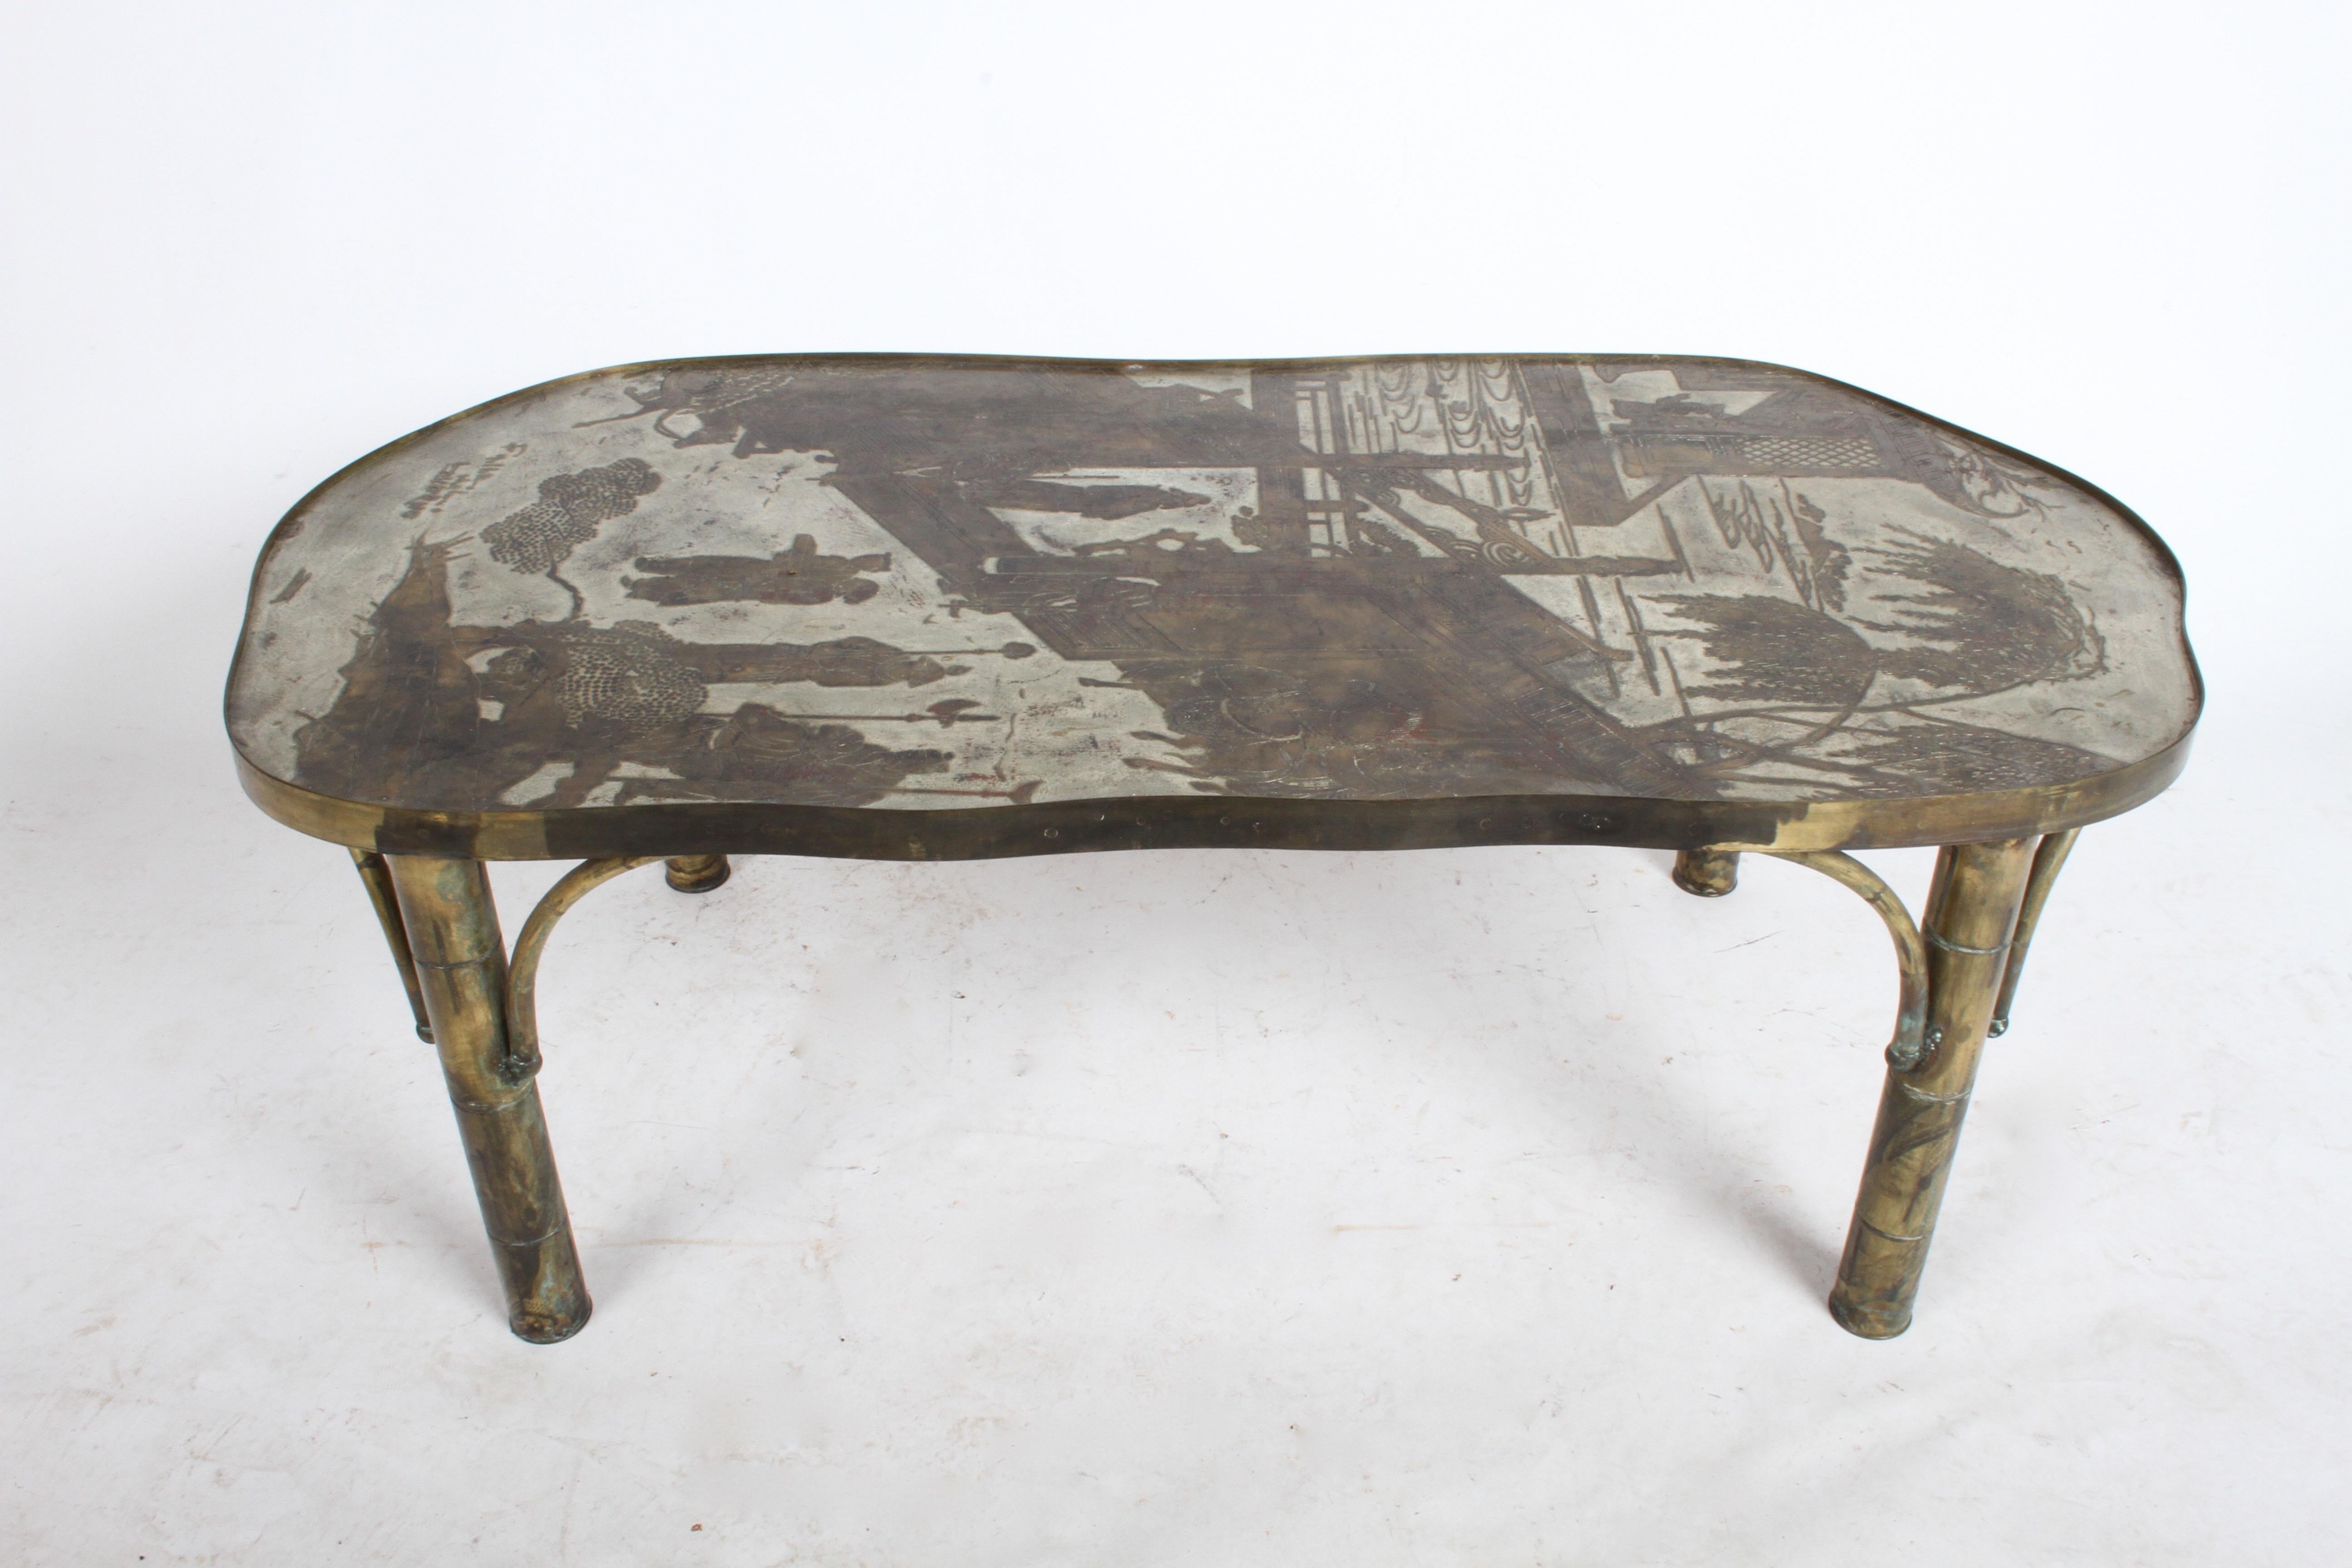 Philip & Kelvin LaVerne Chan 140 coffee table with Chinese scene in patinated bronze and pewter with hand-applied enamel by Philip & Kelvin, American 1960's. Signed “Philip & Kelvin LaVerne”. This table has a beautiful patina, having original